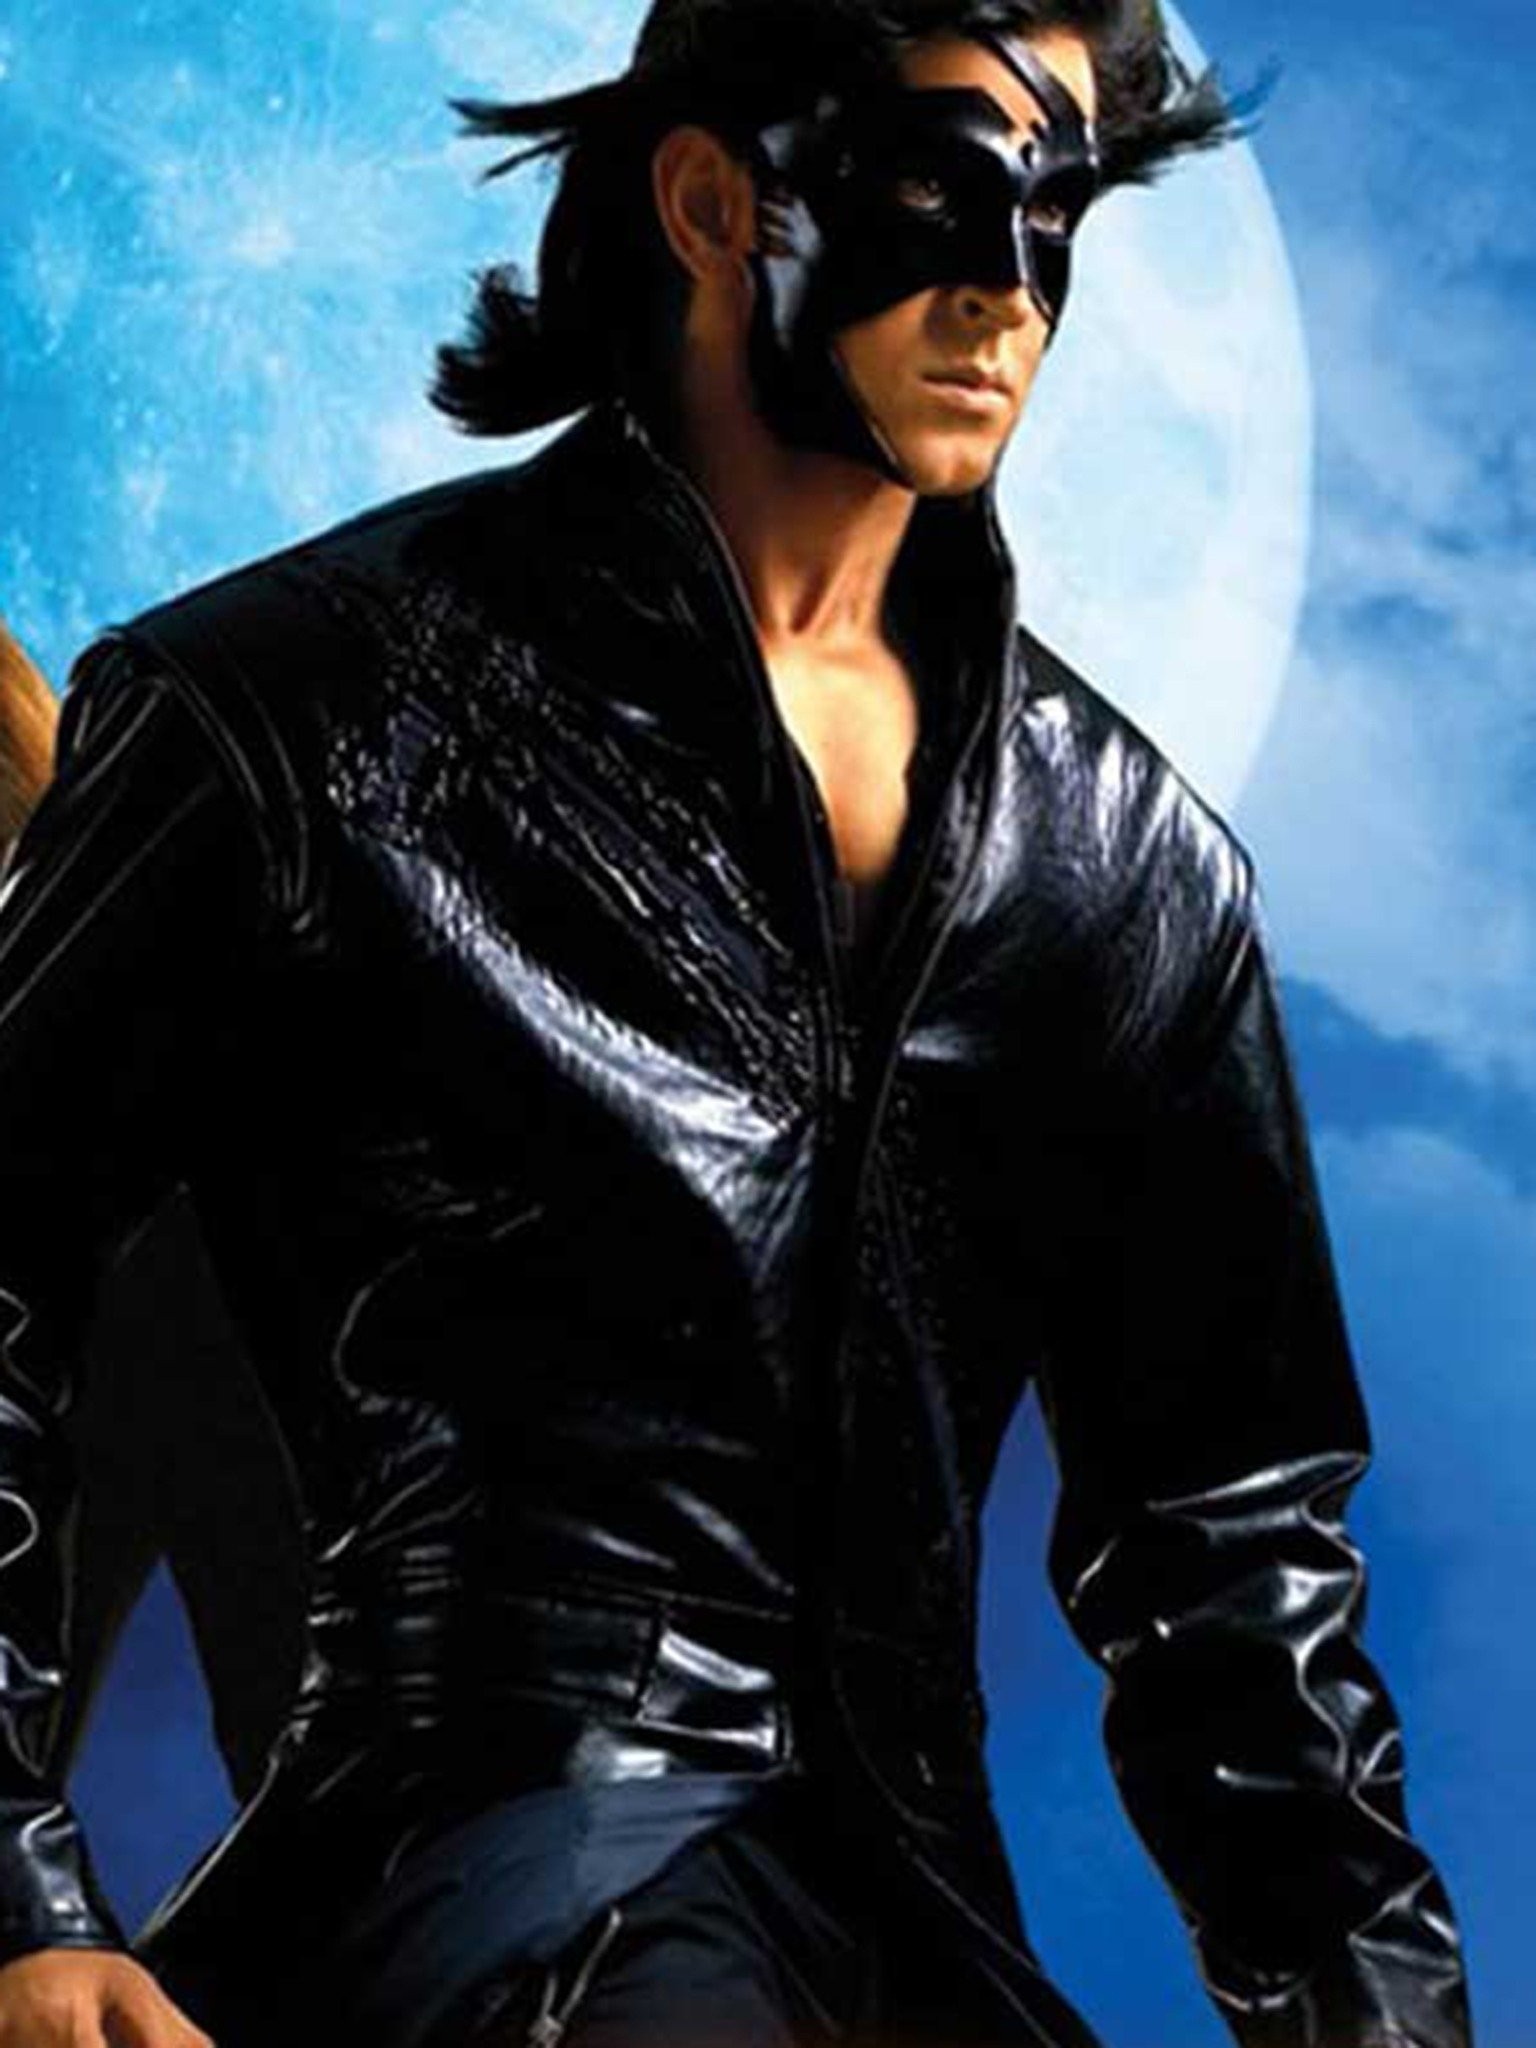 Kid Krrish 3 - Mystery in Mongolia streaming: where to watch online?